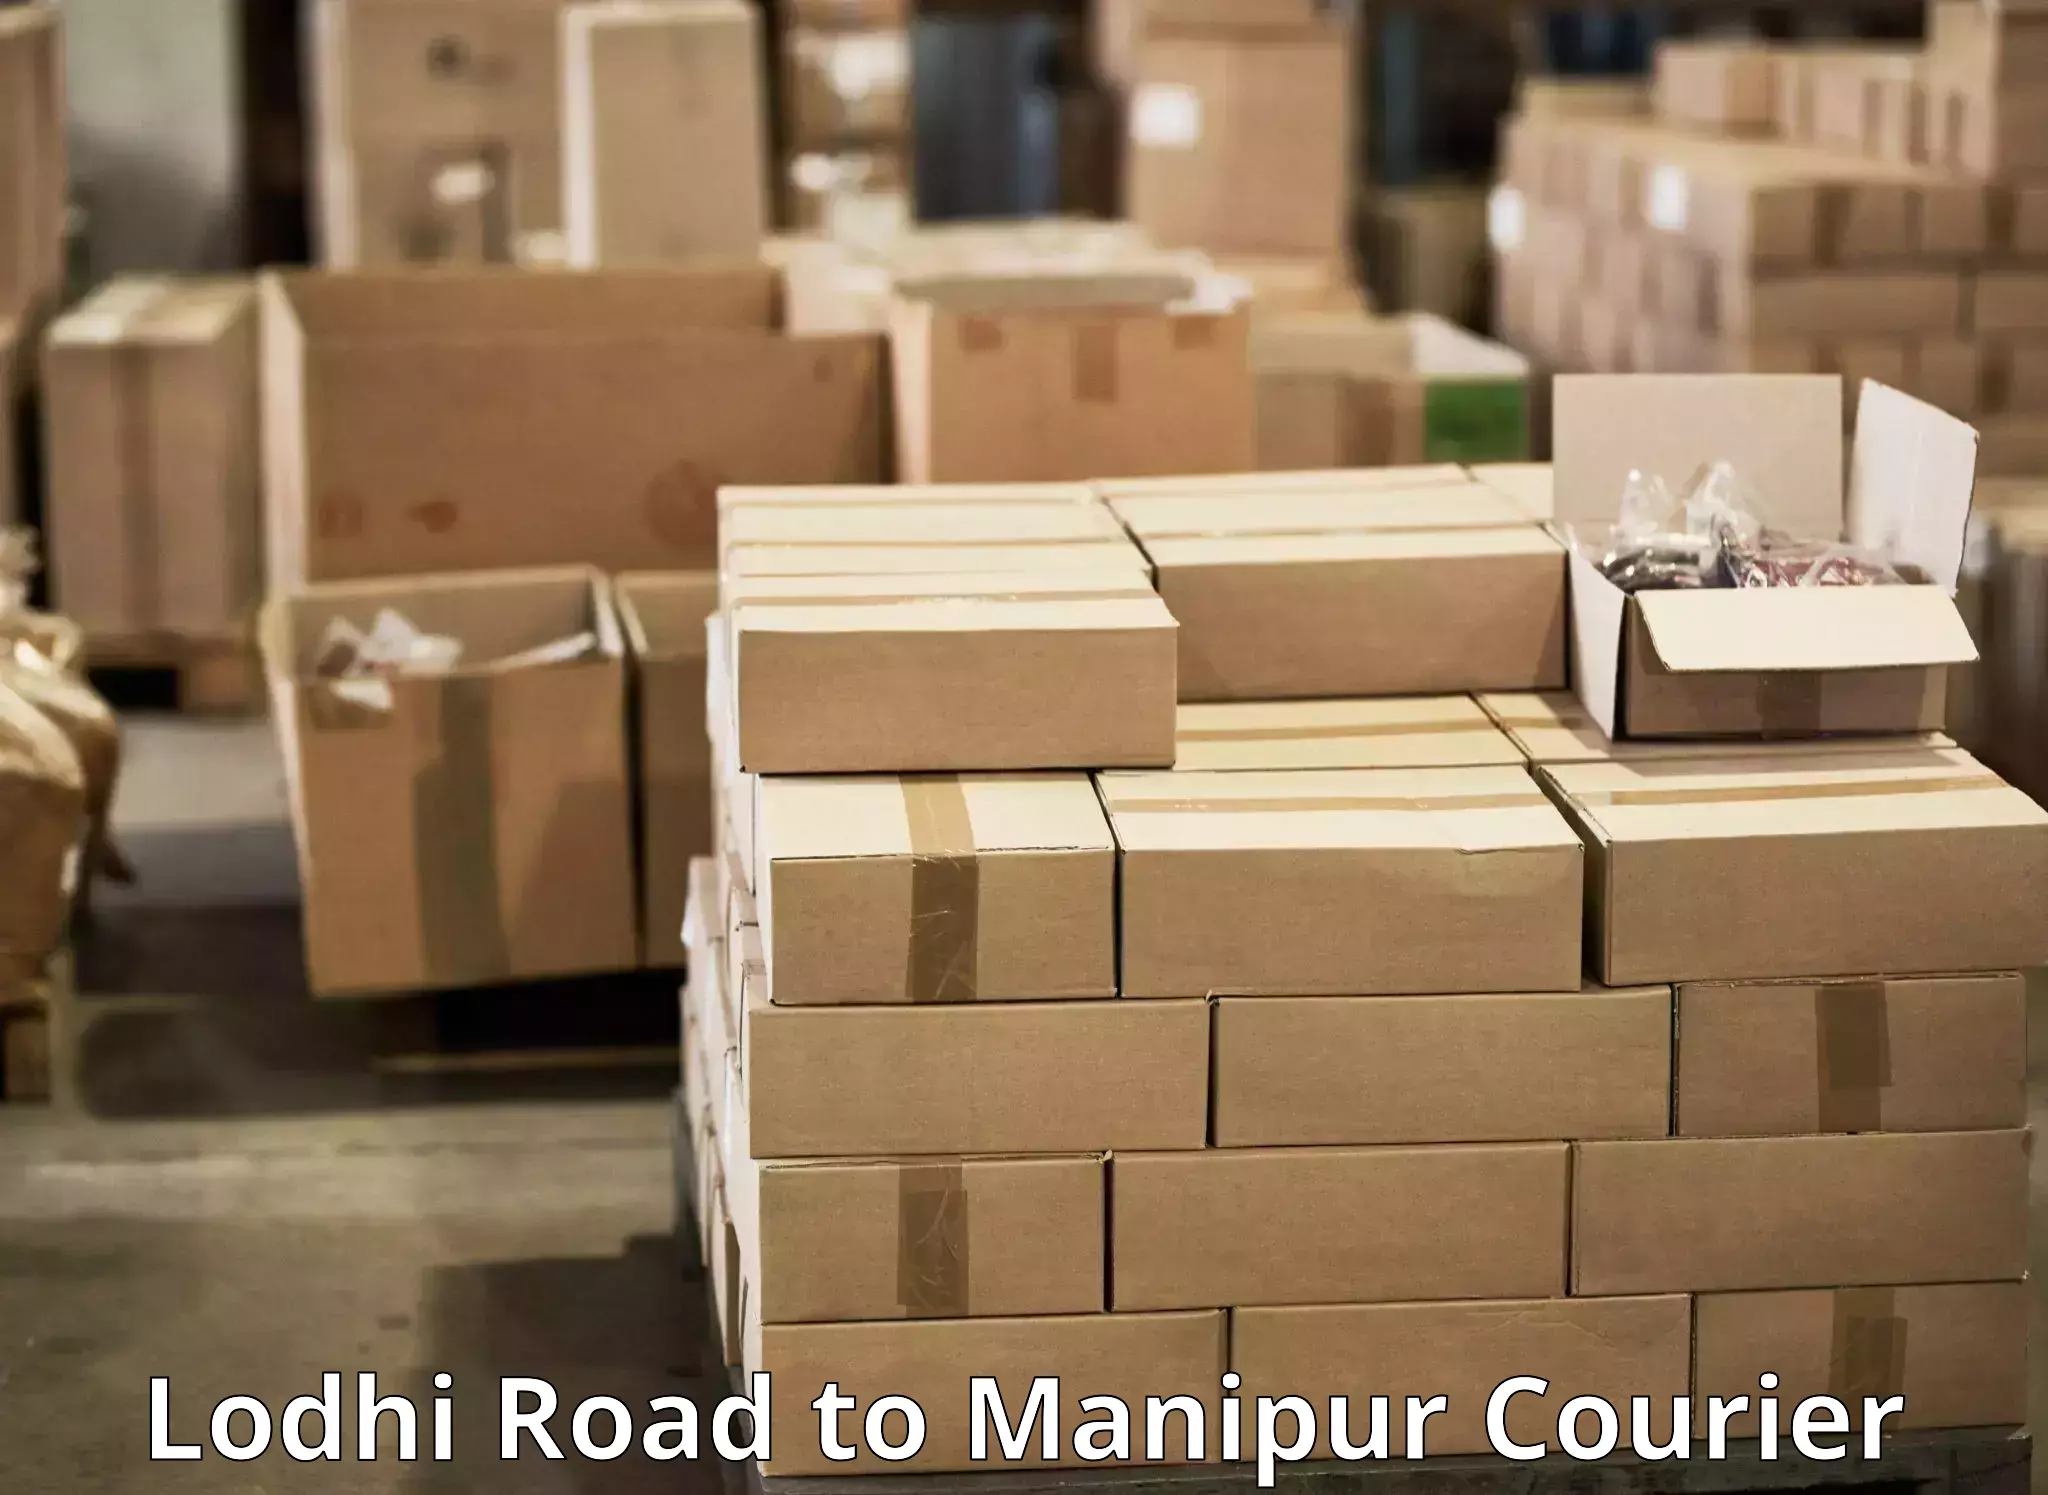 Courier service efficiency Lodhi Road to Kanti